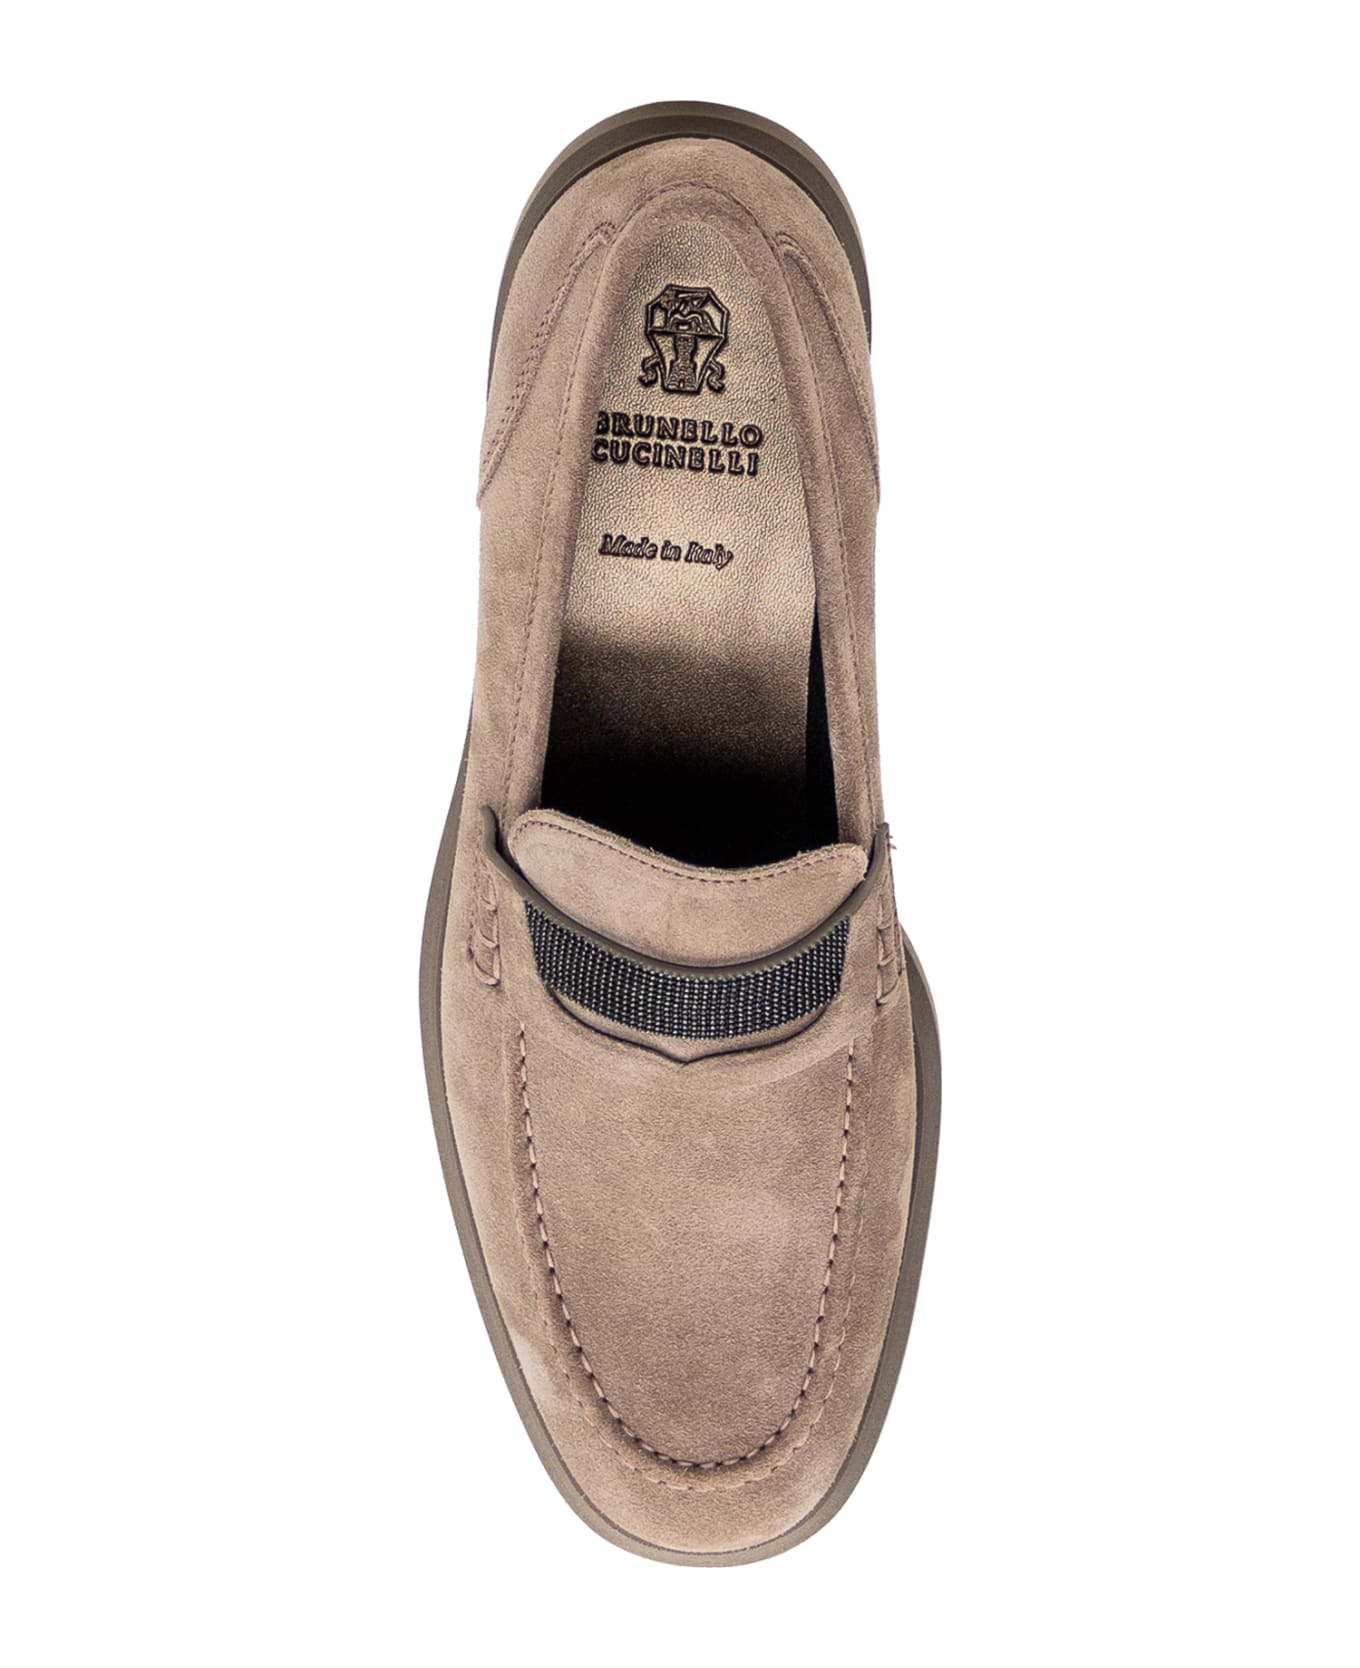 Brunello Cucinelli Penny Loafer - Ice